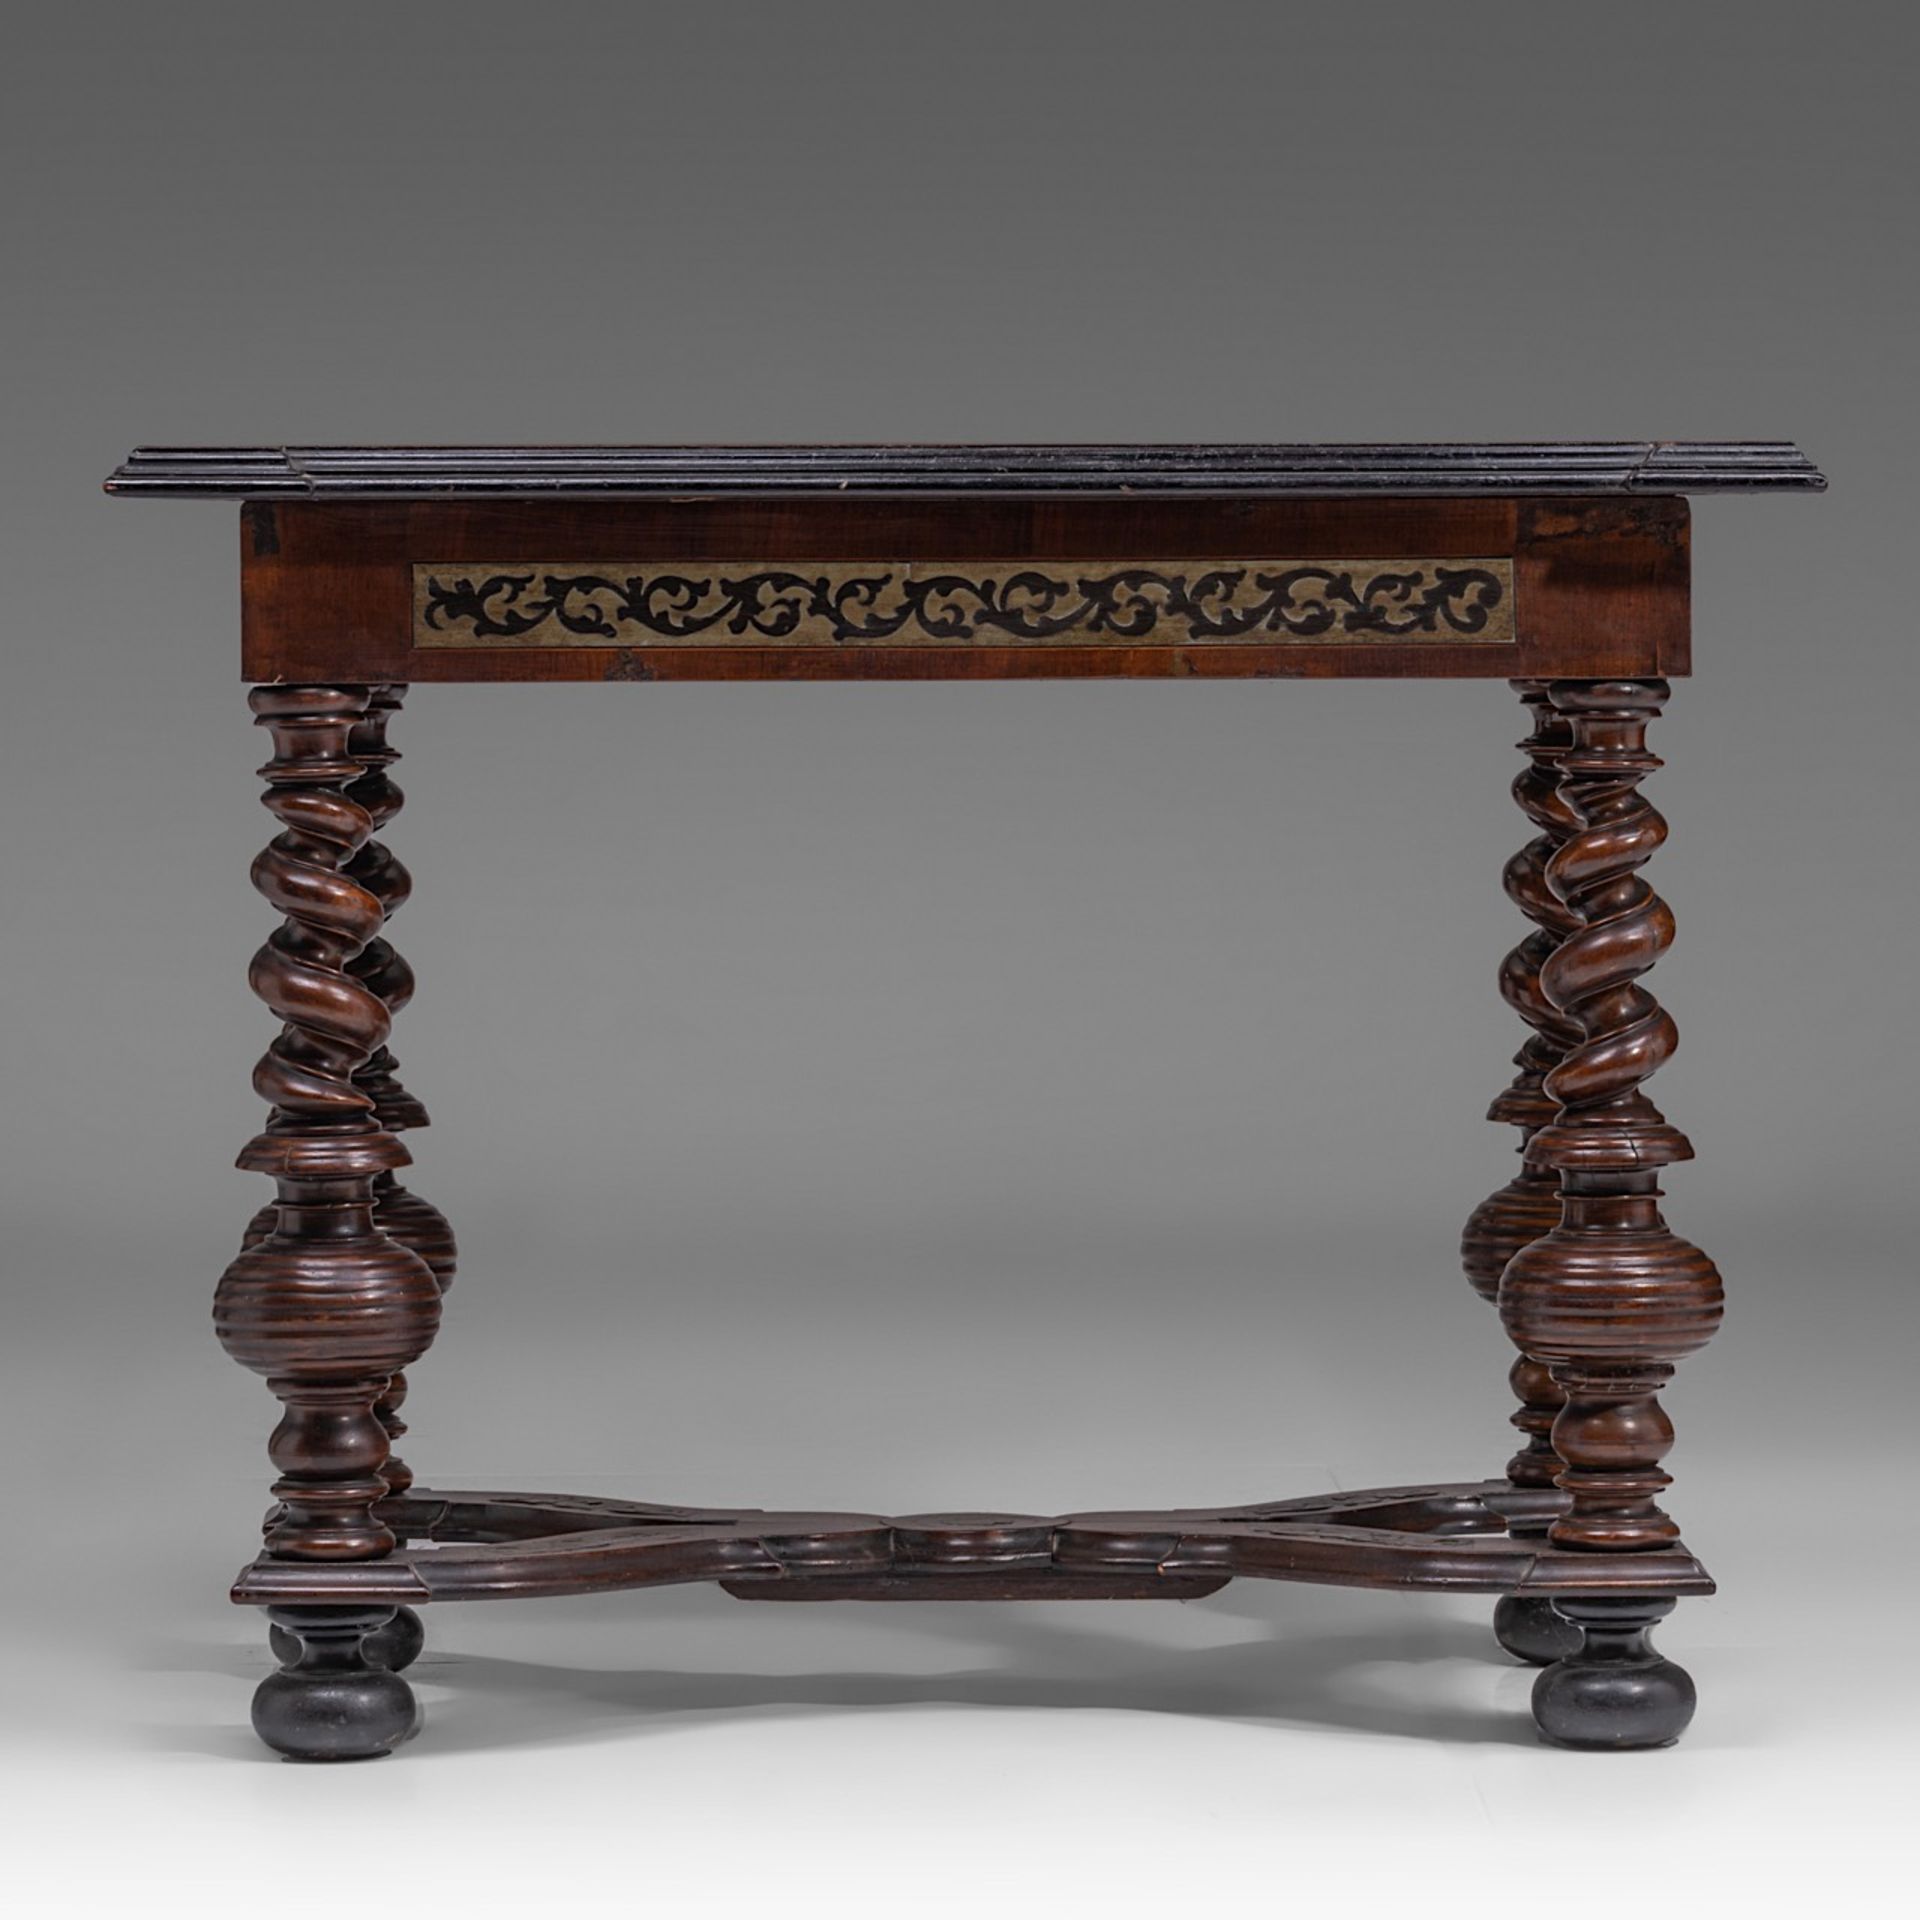 A fine Baroque rosewood and mahogany veneered centre table, 17thC, H 80 - W 105 - D 60 cm - Image 2 of 7